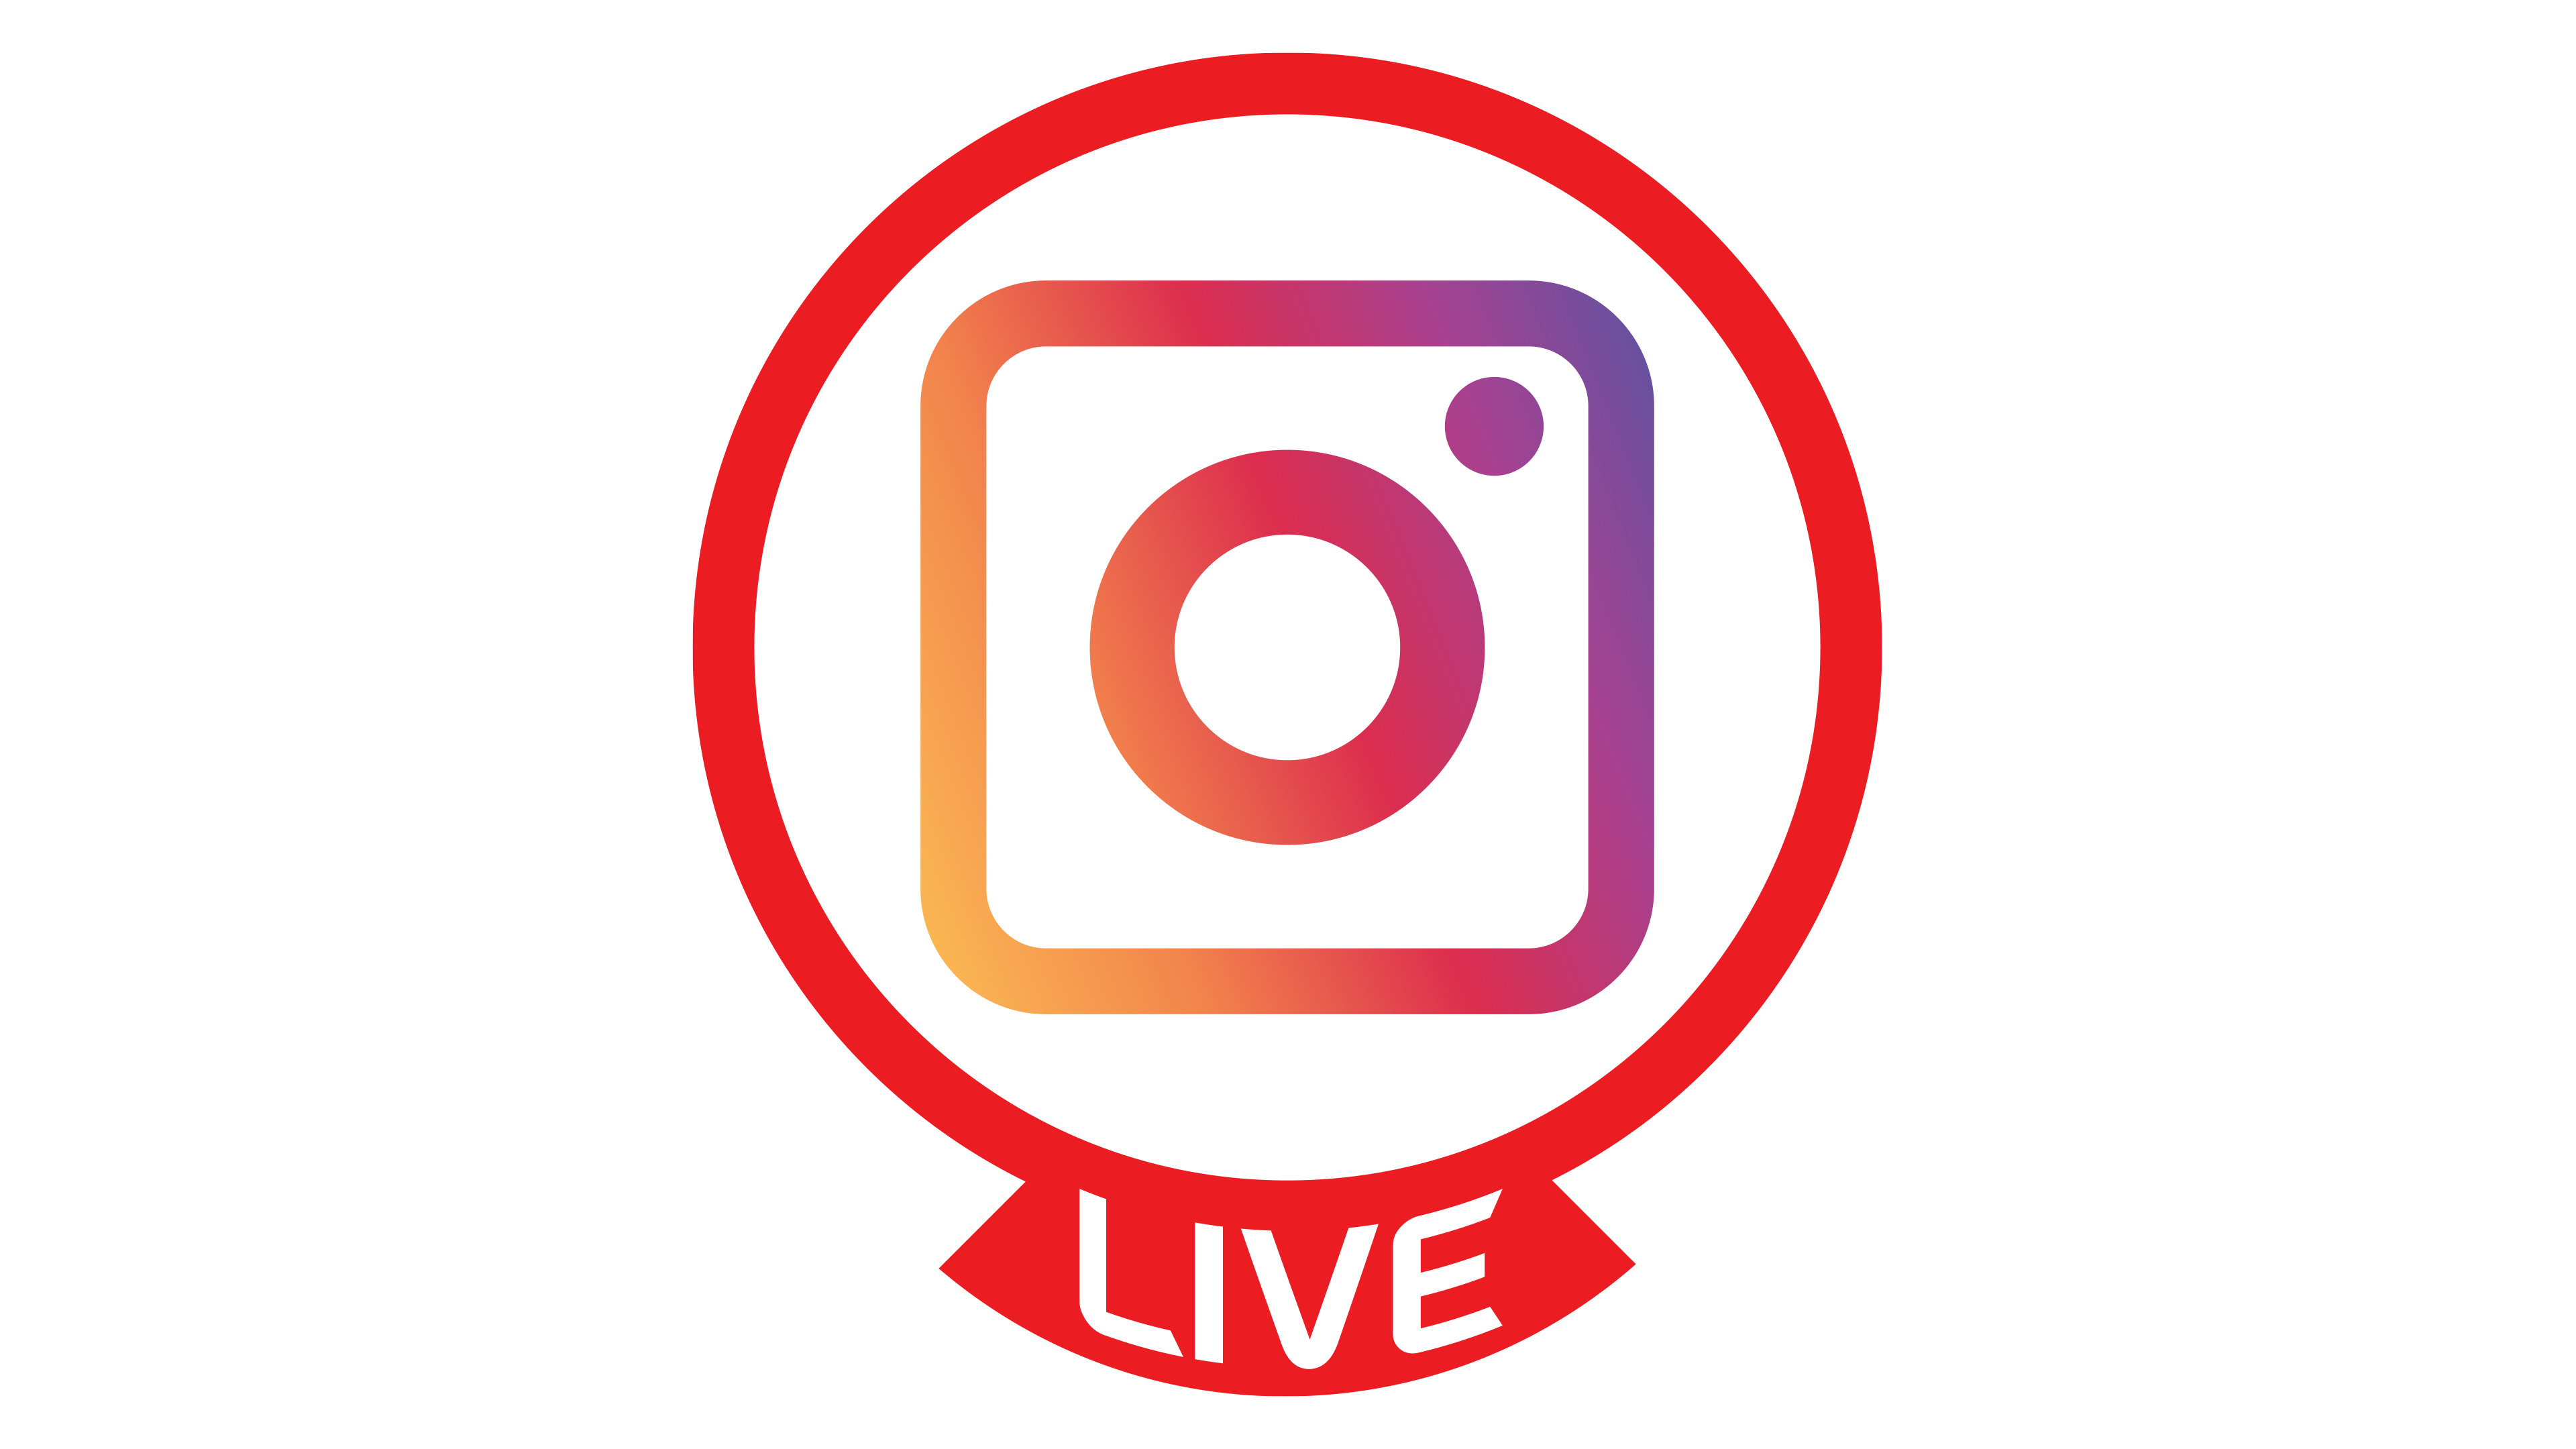 Instagram Live Stream Cliparts, Stock Vector and Royalty Free Instagram Live  Stream Illustrations